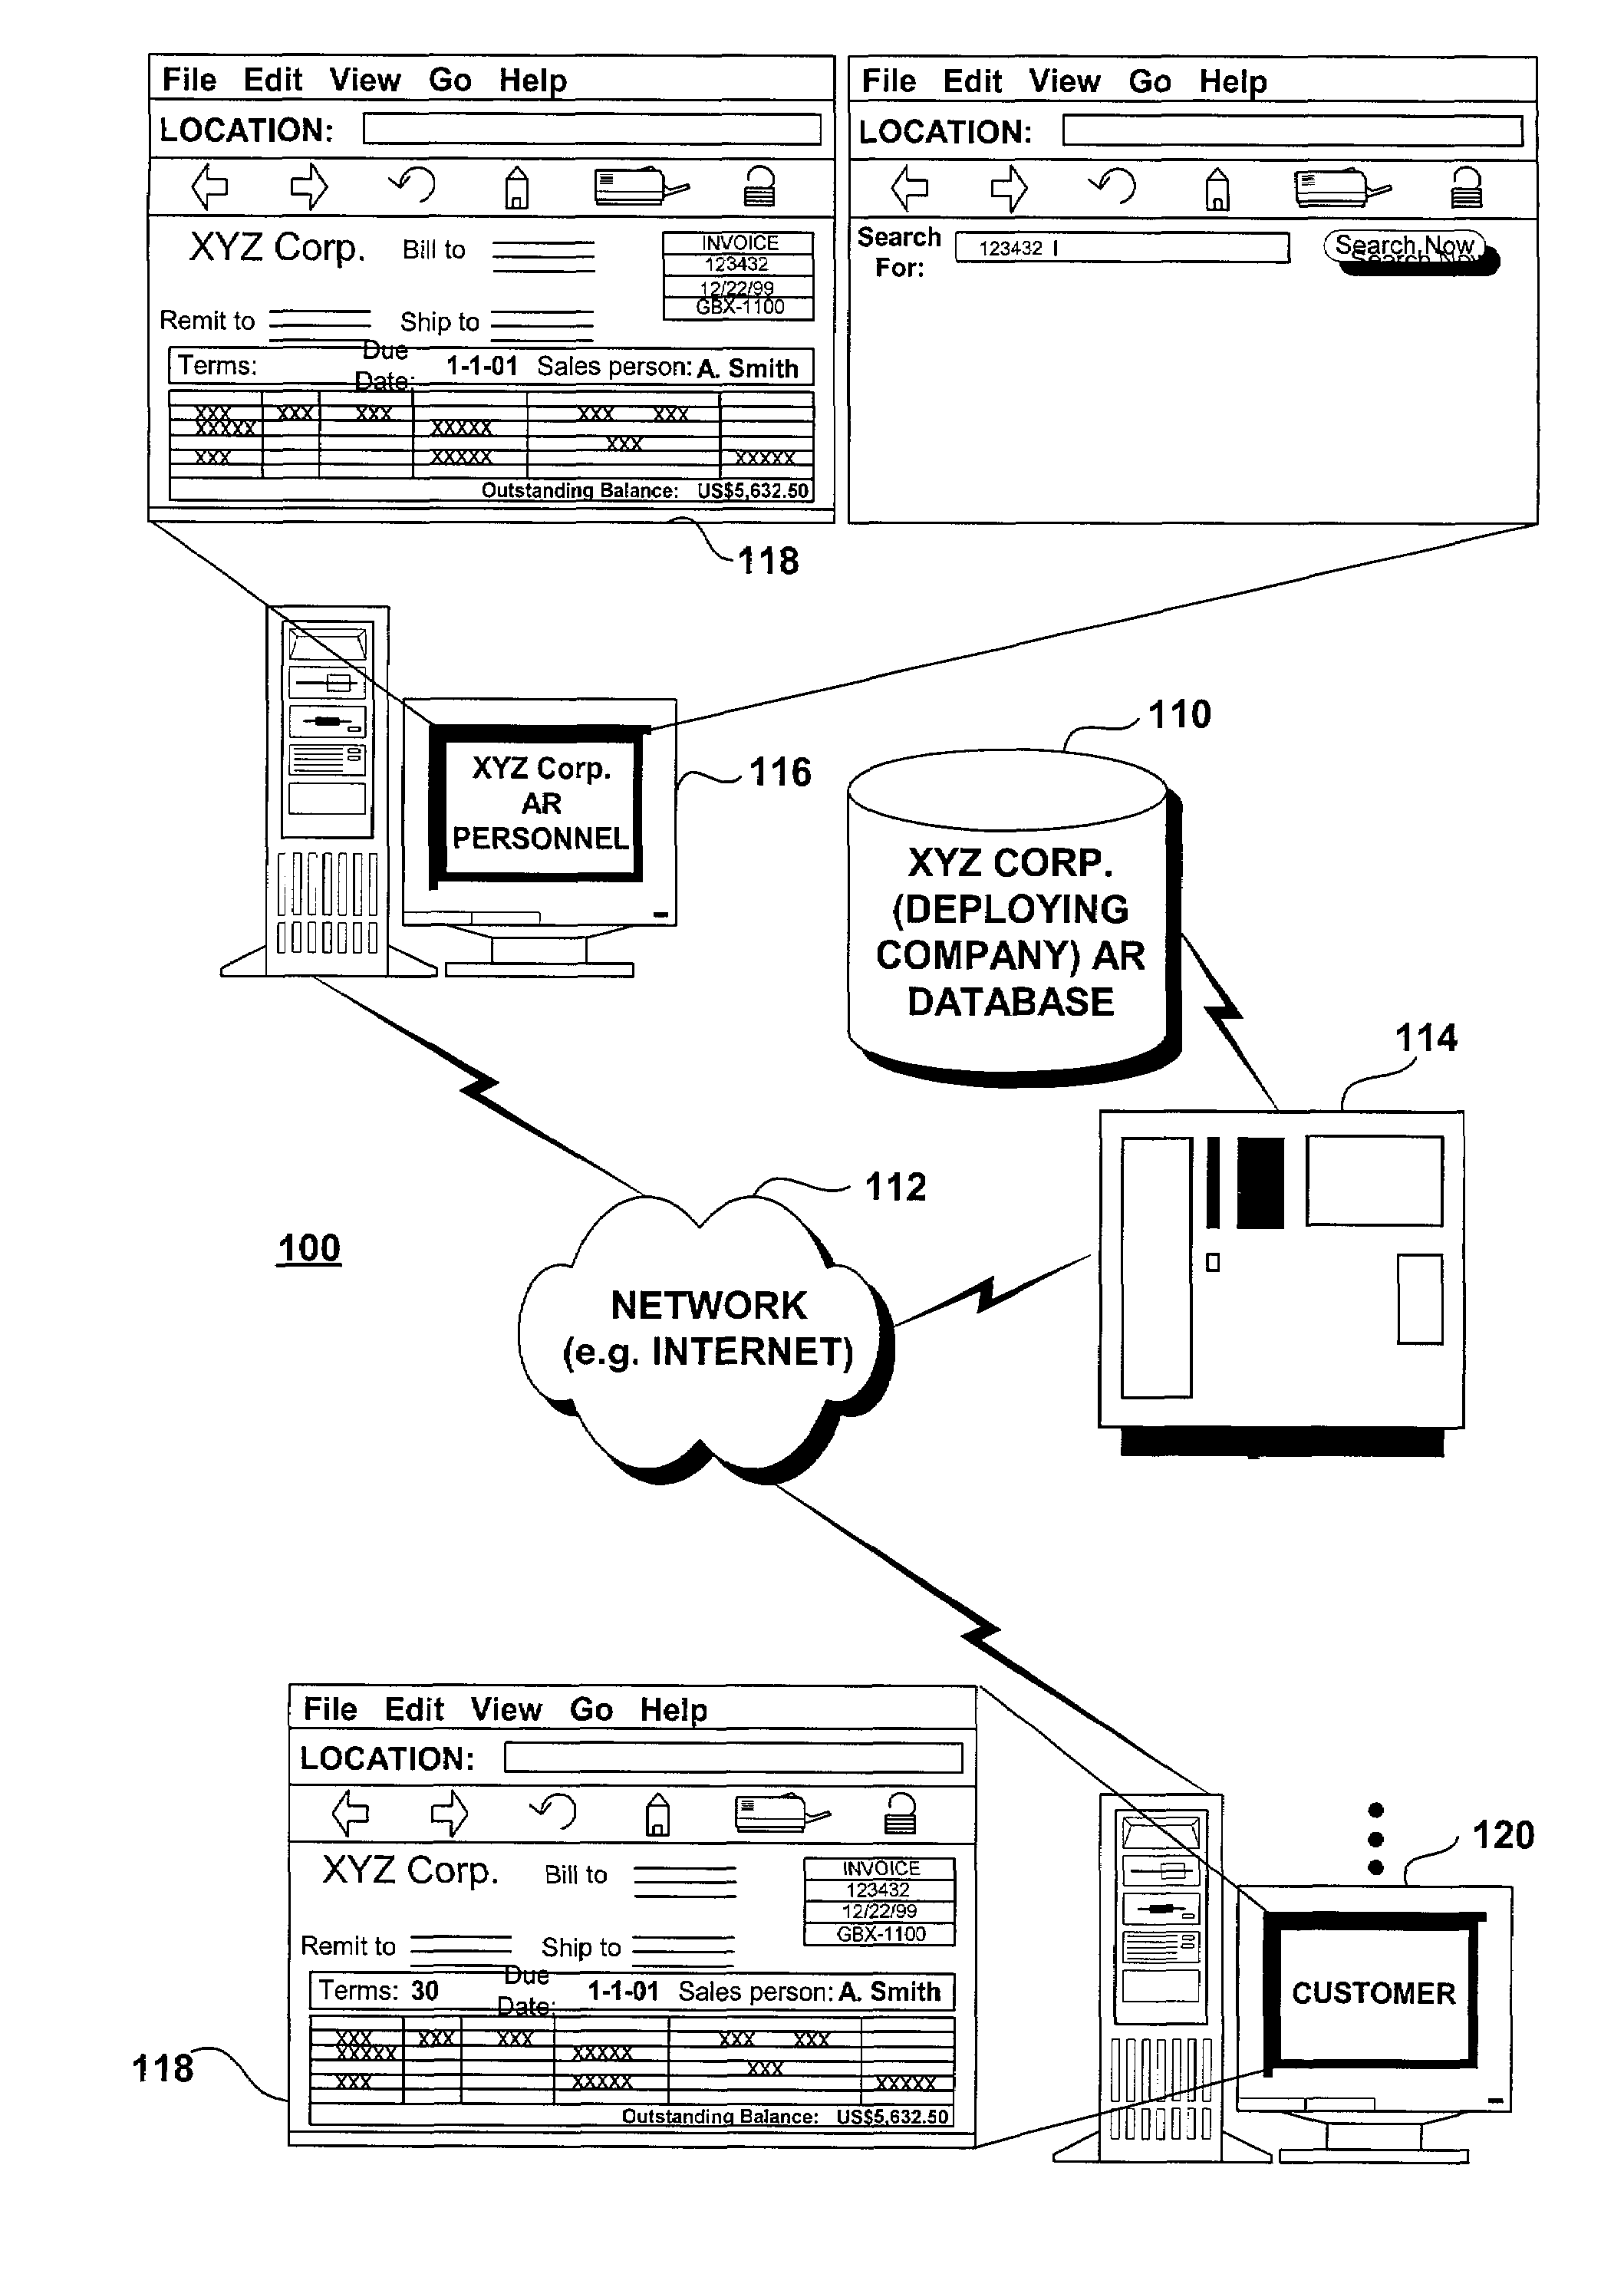 Methods and systems for online self-service receivables management and automated online receivables dispute resolution